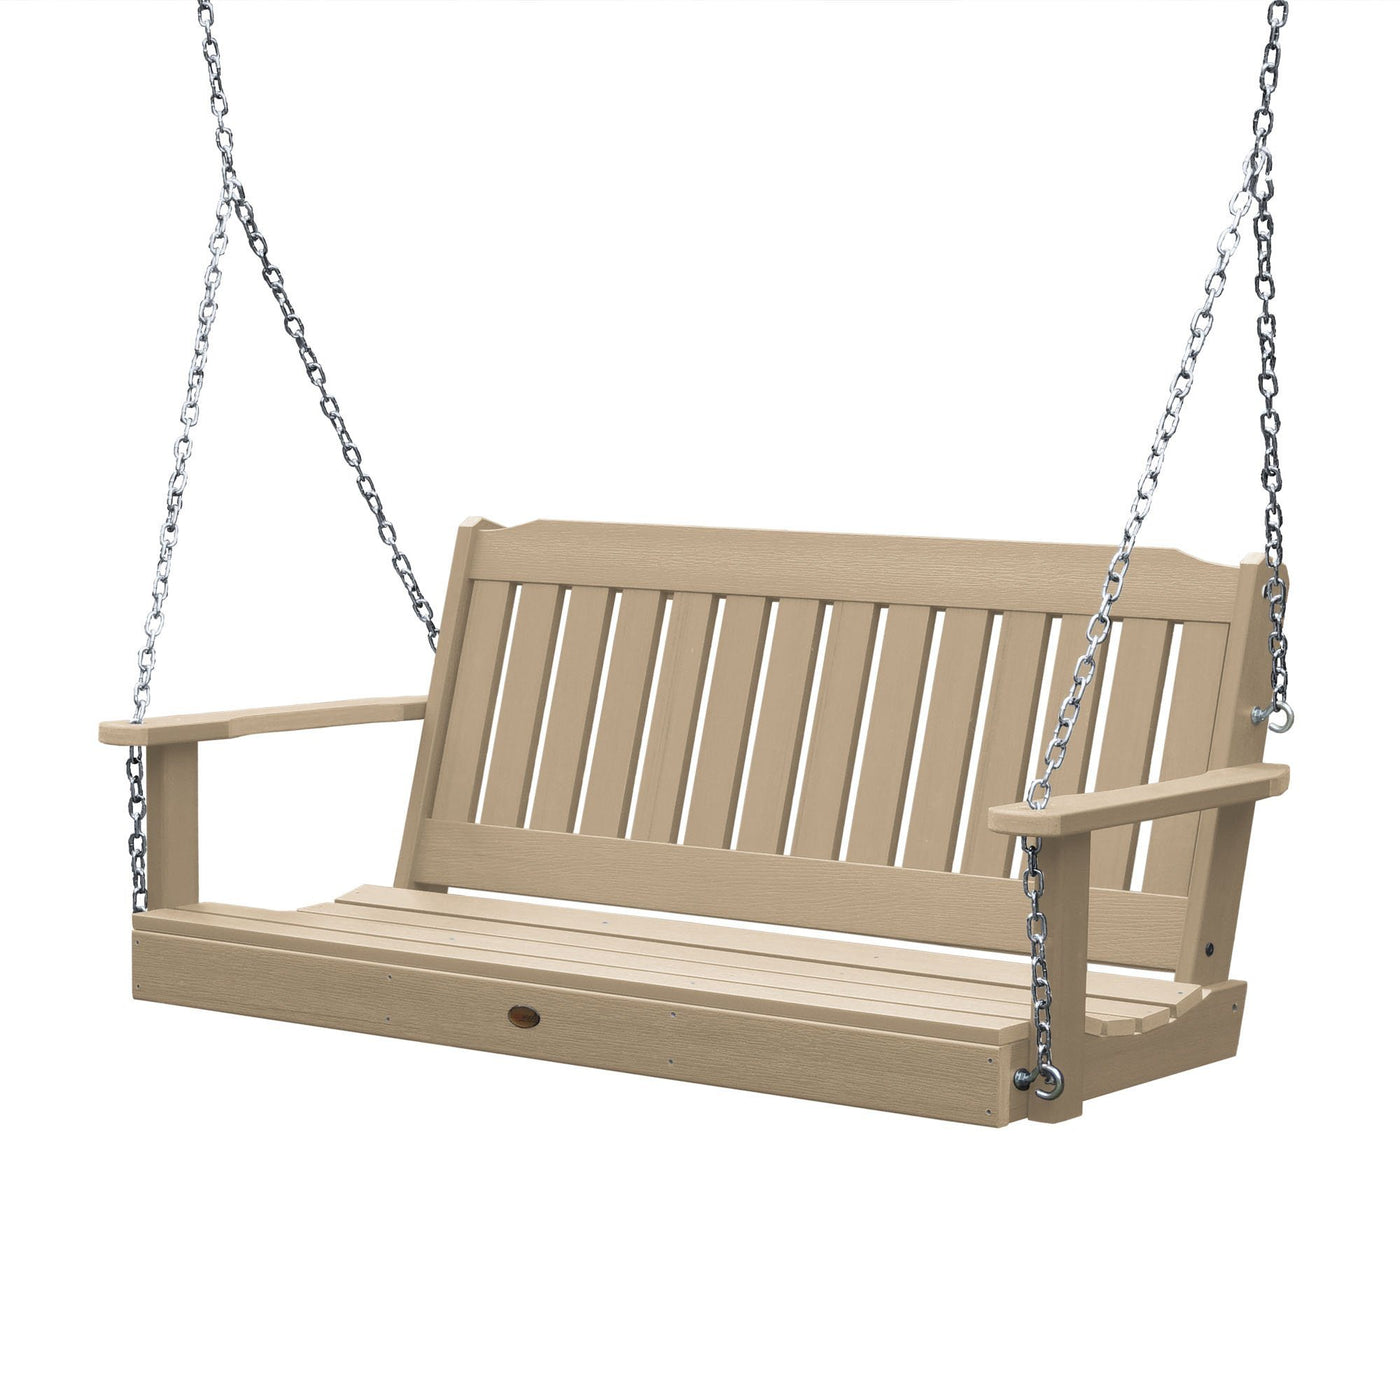 BLOWOUT Lehigh Porch Swing - 5ft BenchSwing Highwood USA Tuscan Taupe 